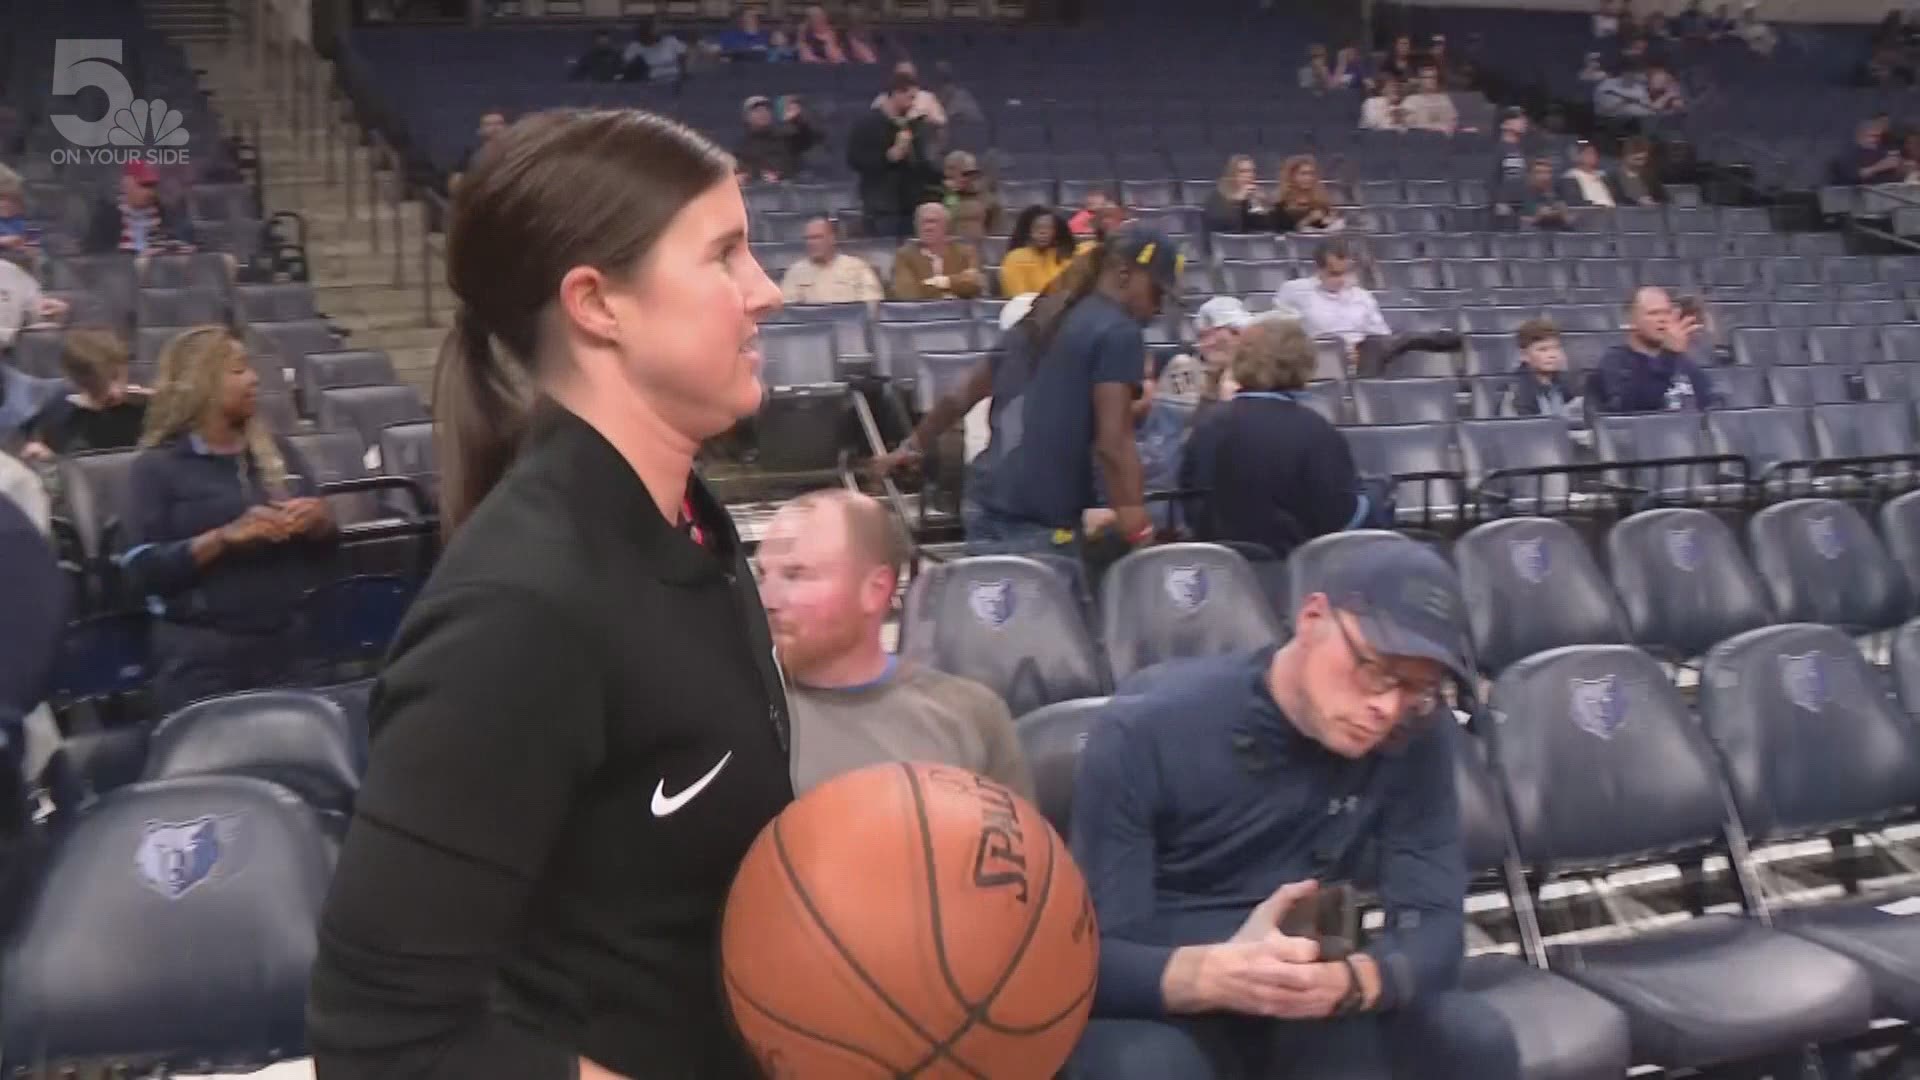 Natalie Sago’s journey from a small town in Missouri to the NBA as a referee has been a blur